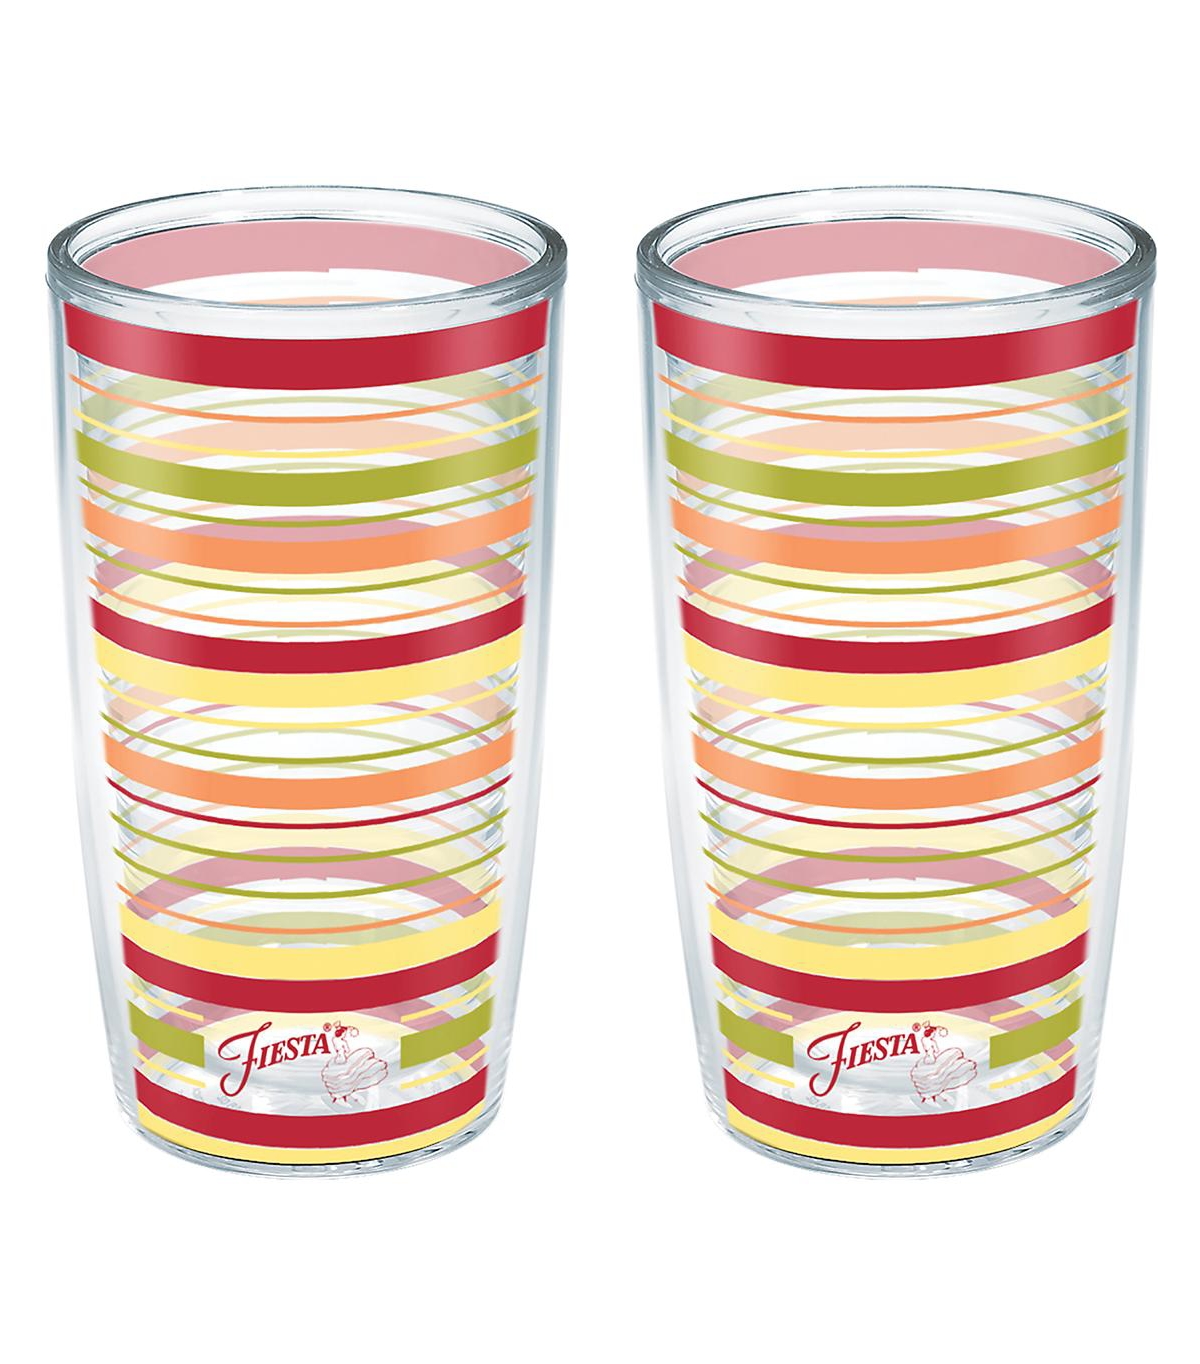 Tervis Tumbler Tervis Fiesta Sunny Stripes Made In Usa Double Walled Insulated Tumbler Cup Keeps Drinks Cold & Hot, In Open Miscellaneous